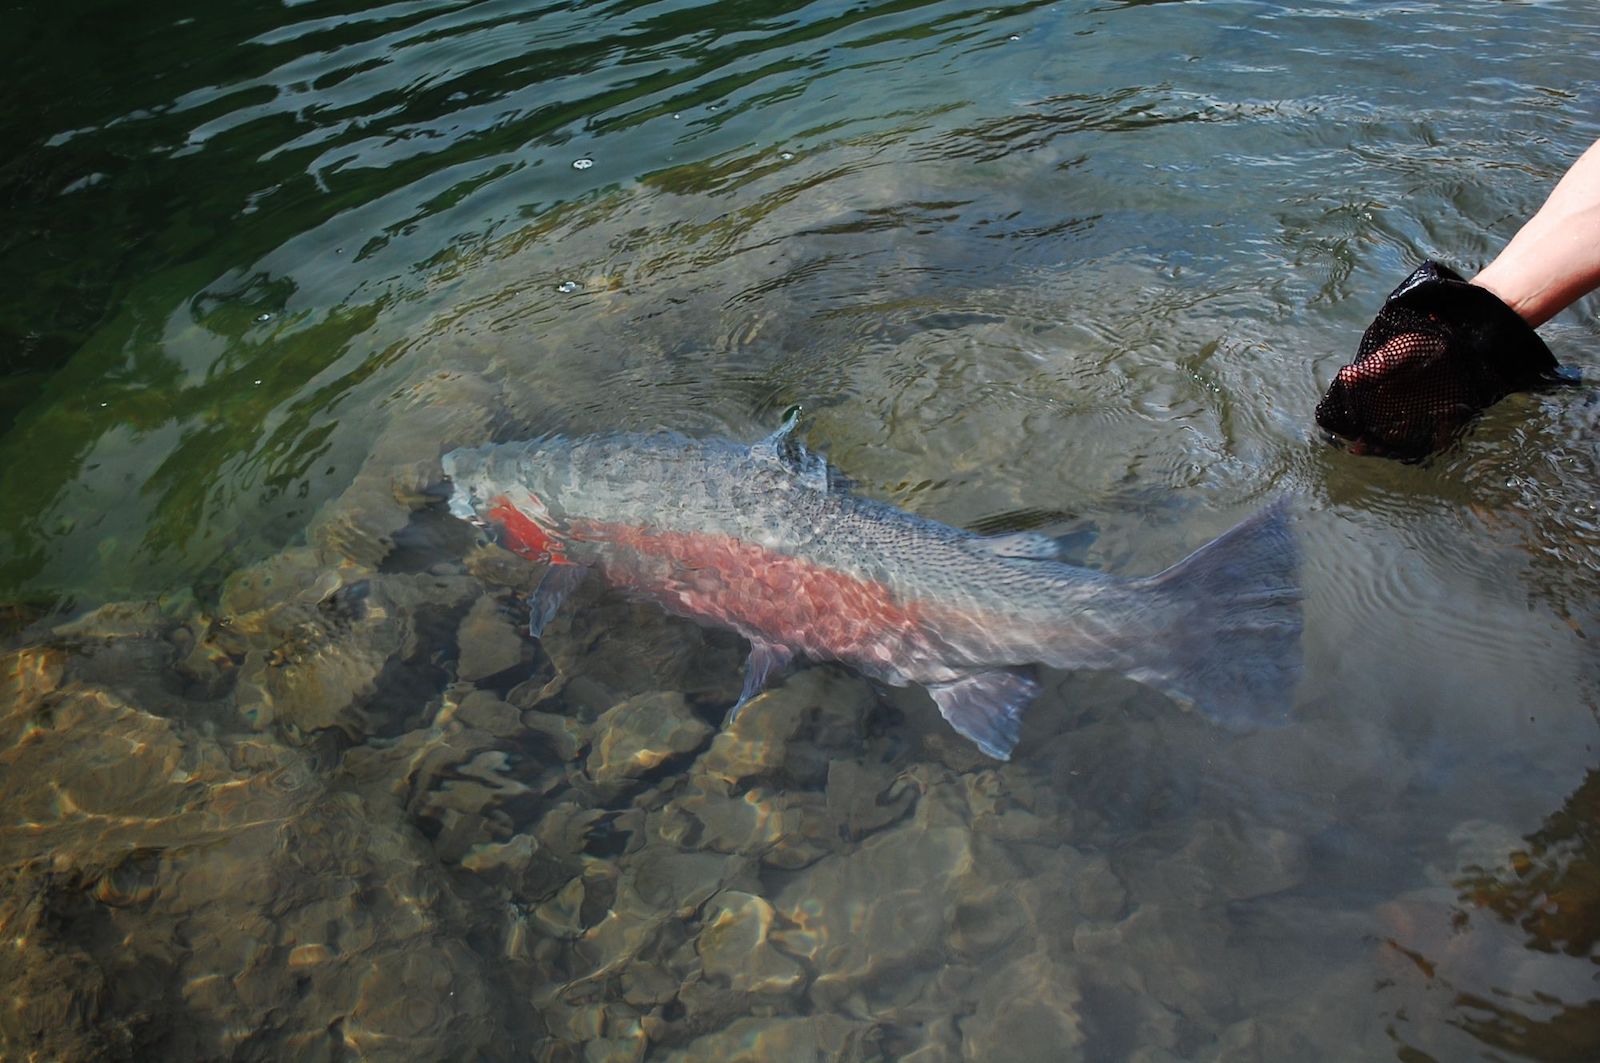 A large fish with a red stripe down its side is shown being released into water by a hand wearing a netted glove.